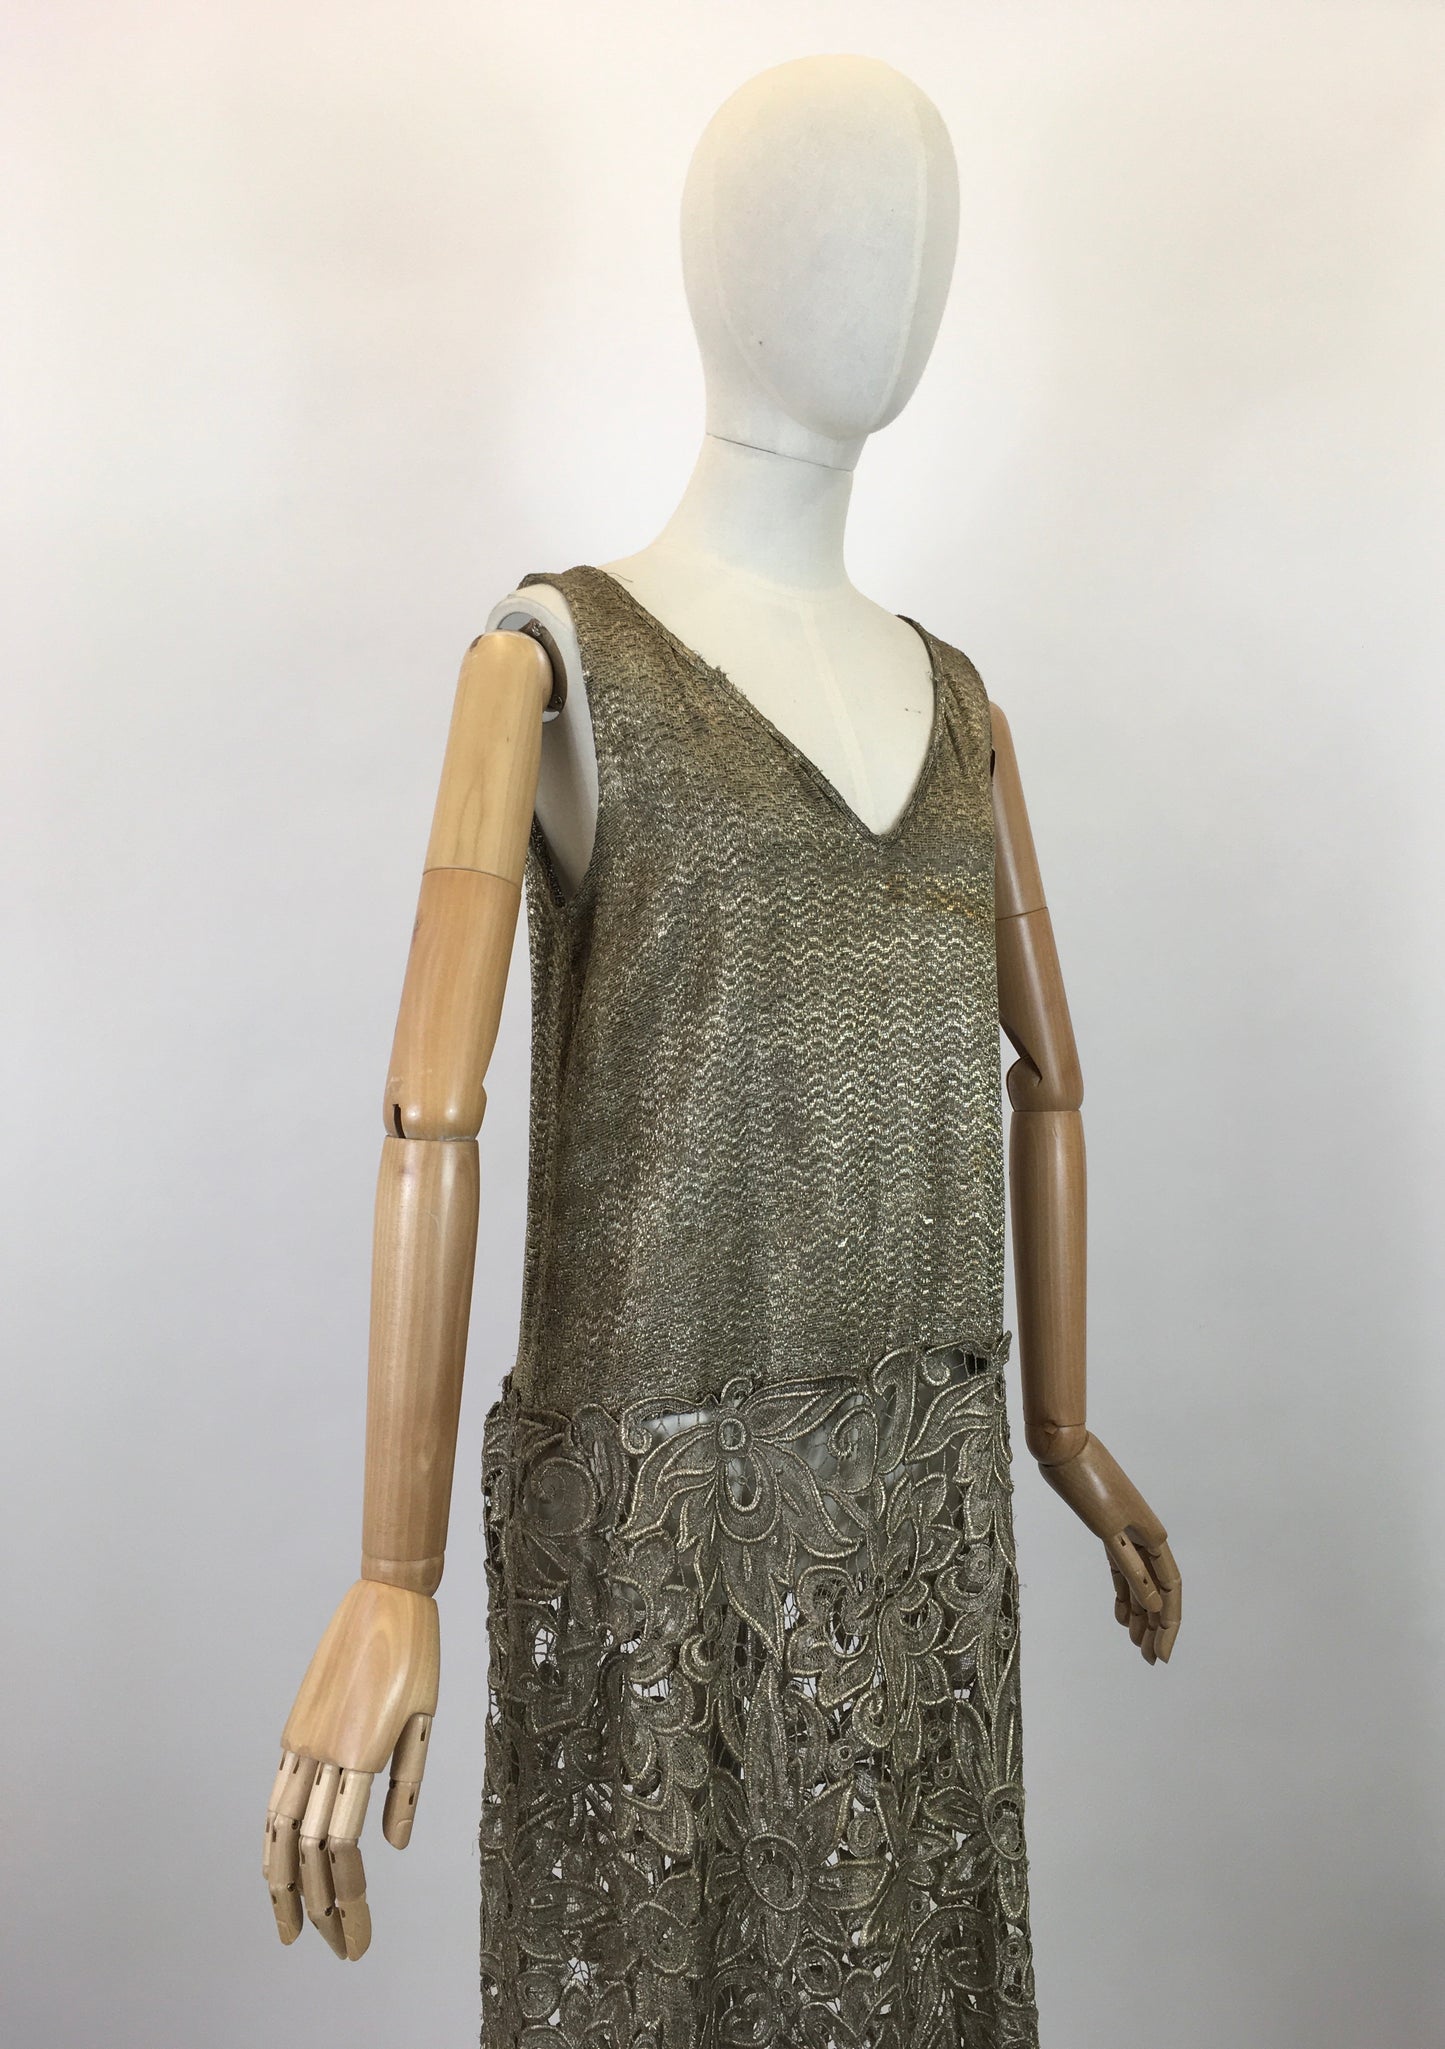 Original 1920's Sensational Gold Lame Dress with Fretwork Floral - Worn in 1926 For The Original Owners Wedding